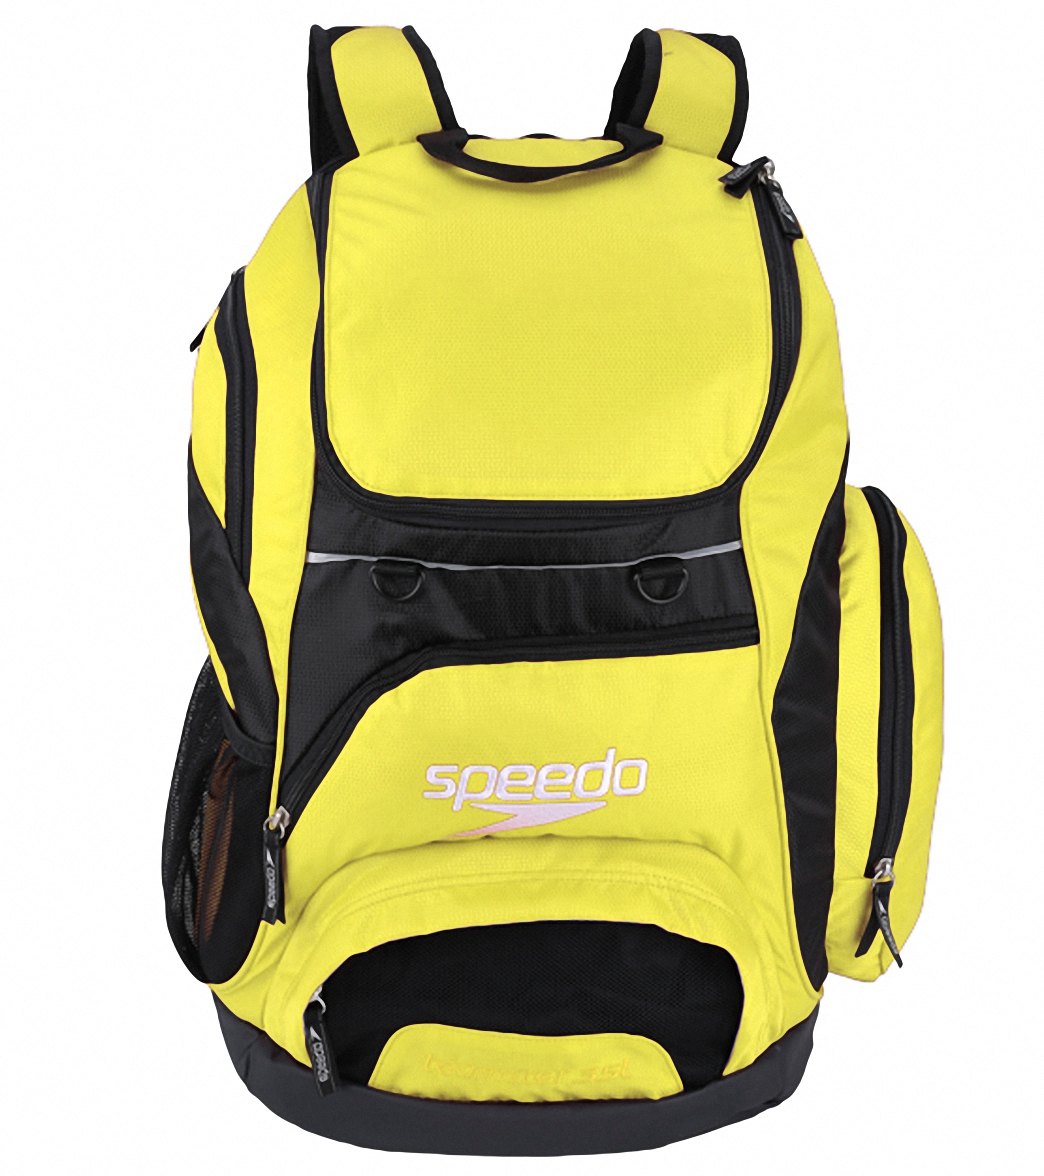 Speedo Large 35L Teamster Backpack - Blazing Yellow/Black - Swimoutlet.com